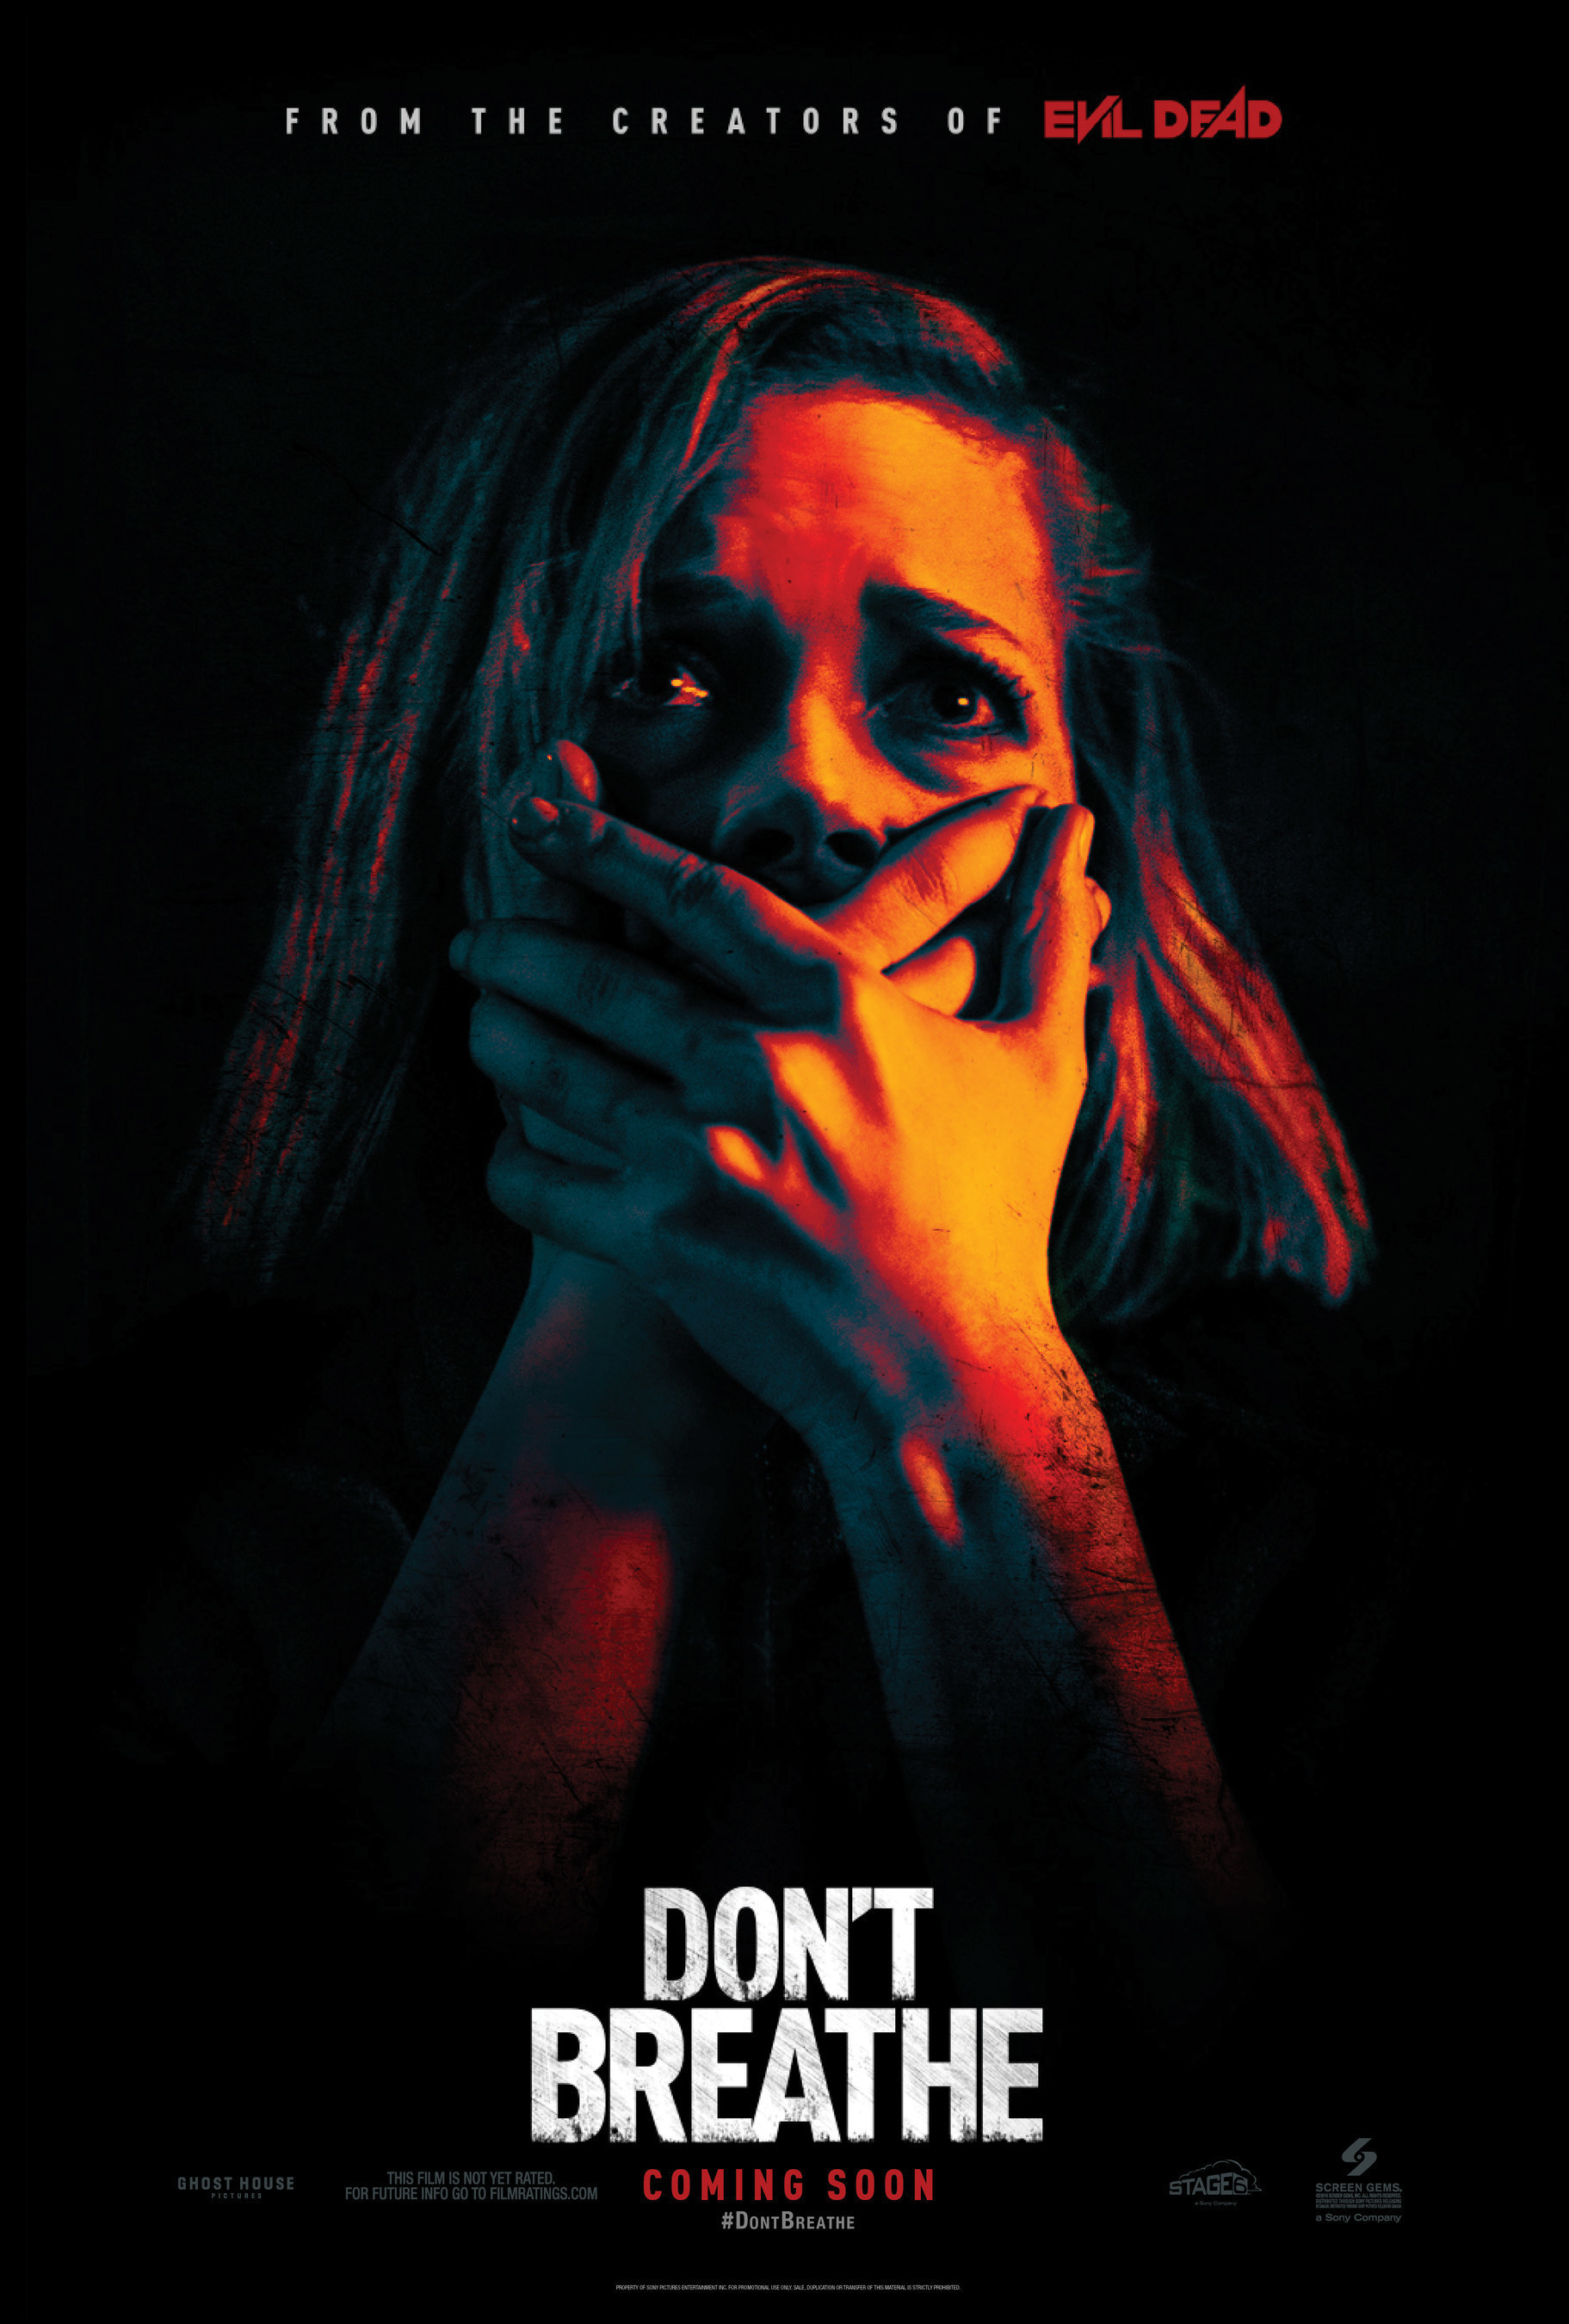 DON'T BREATHE official poster - opening in theaters nationwide August 26, 2016 from Screen Gems.